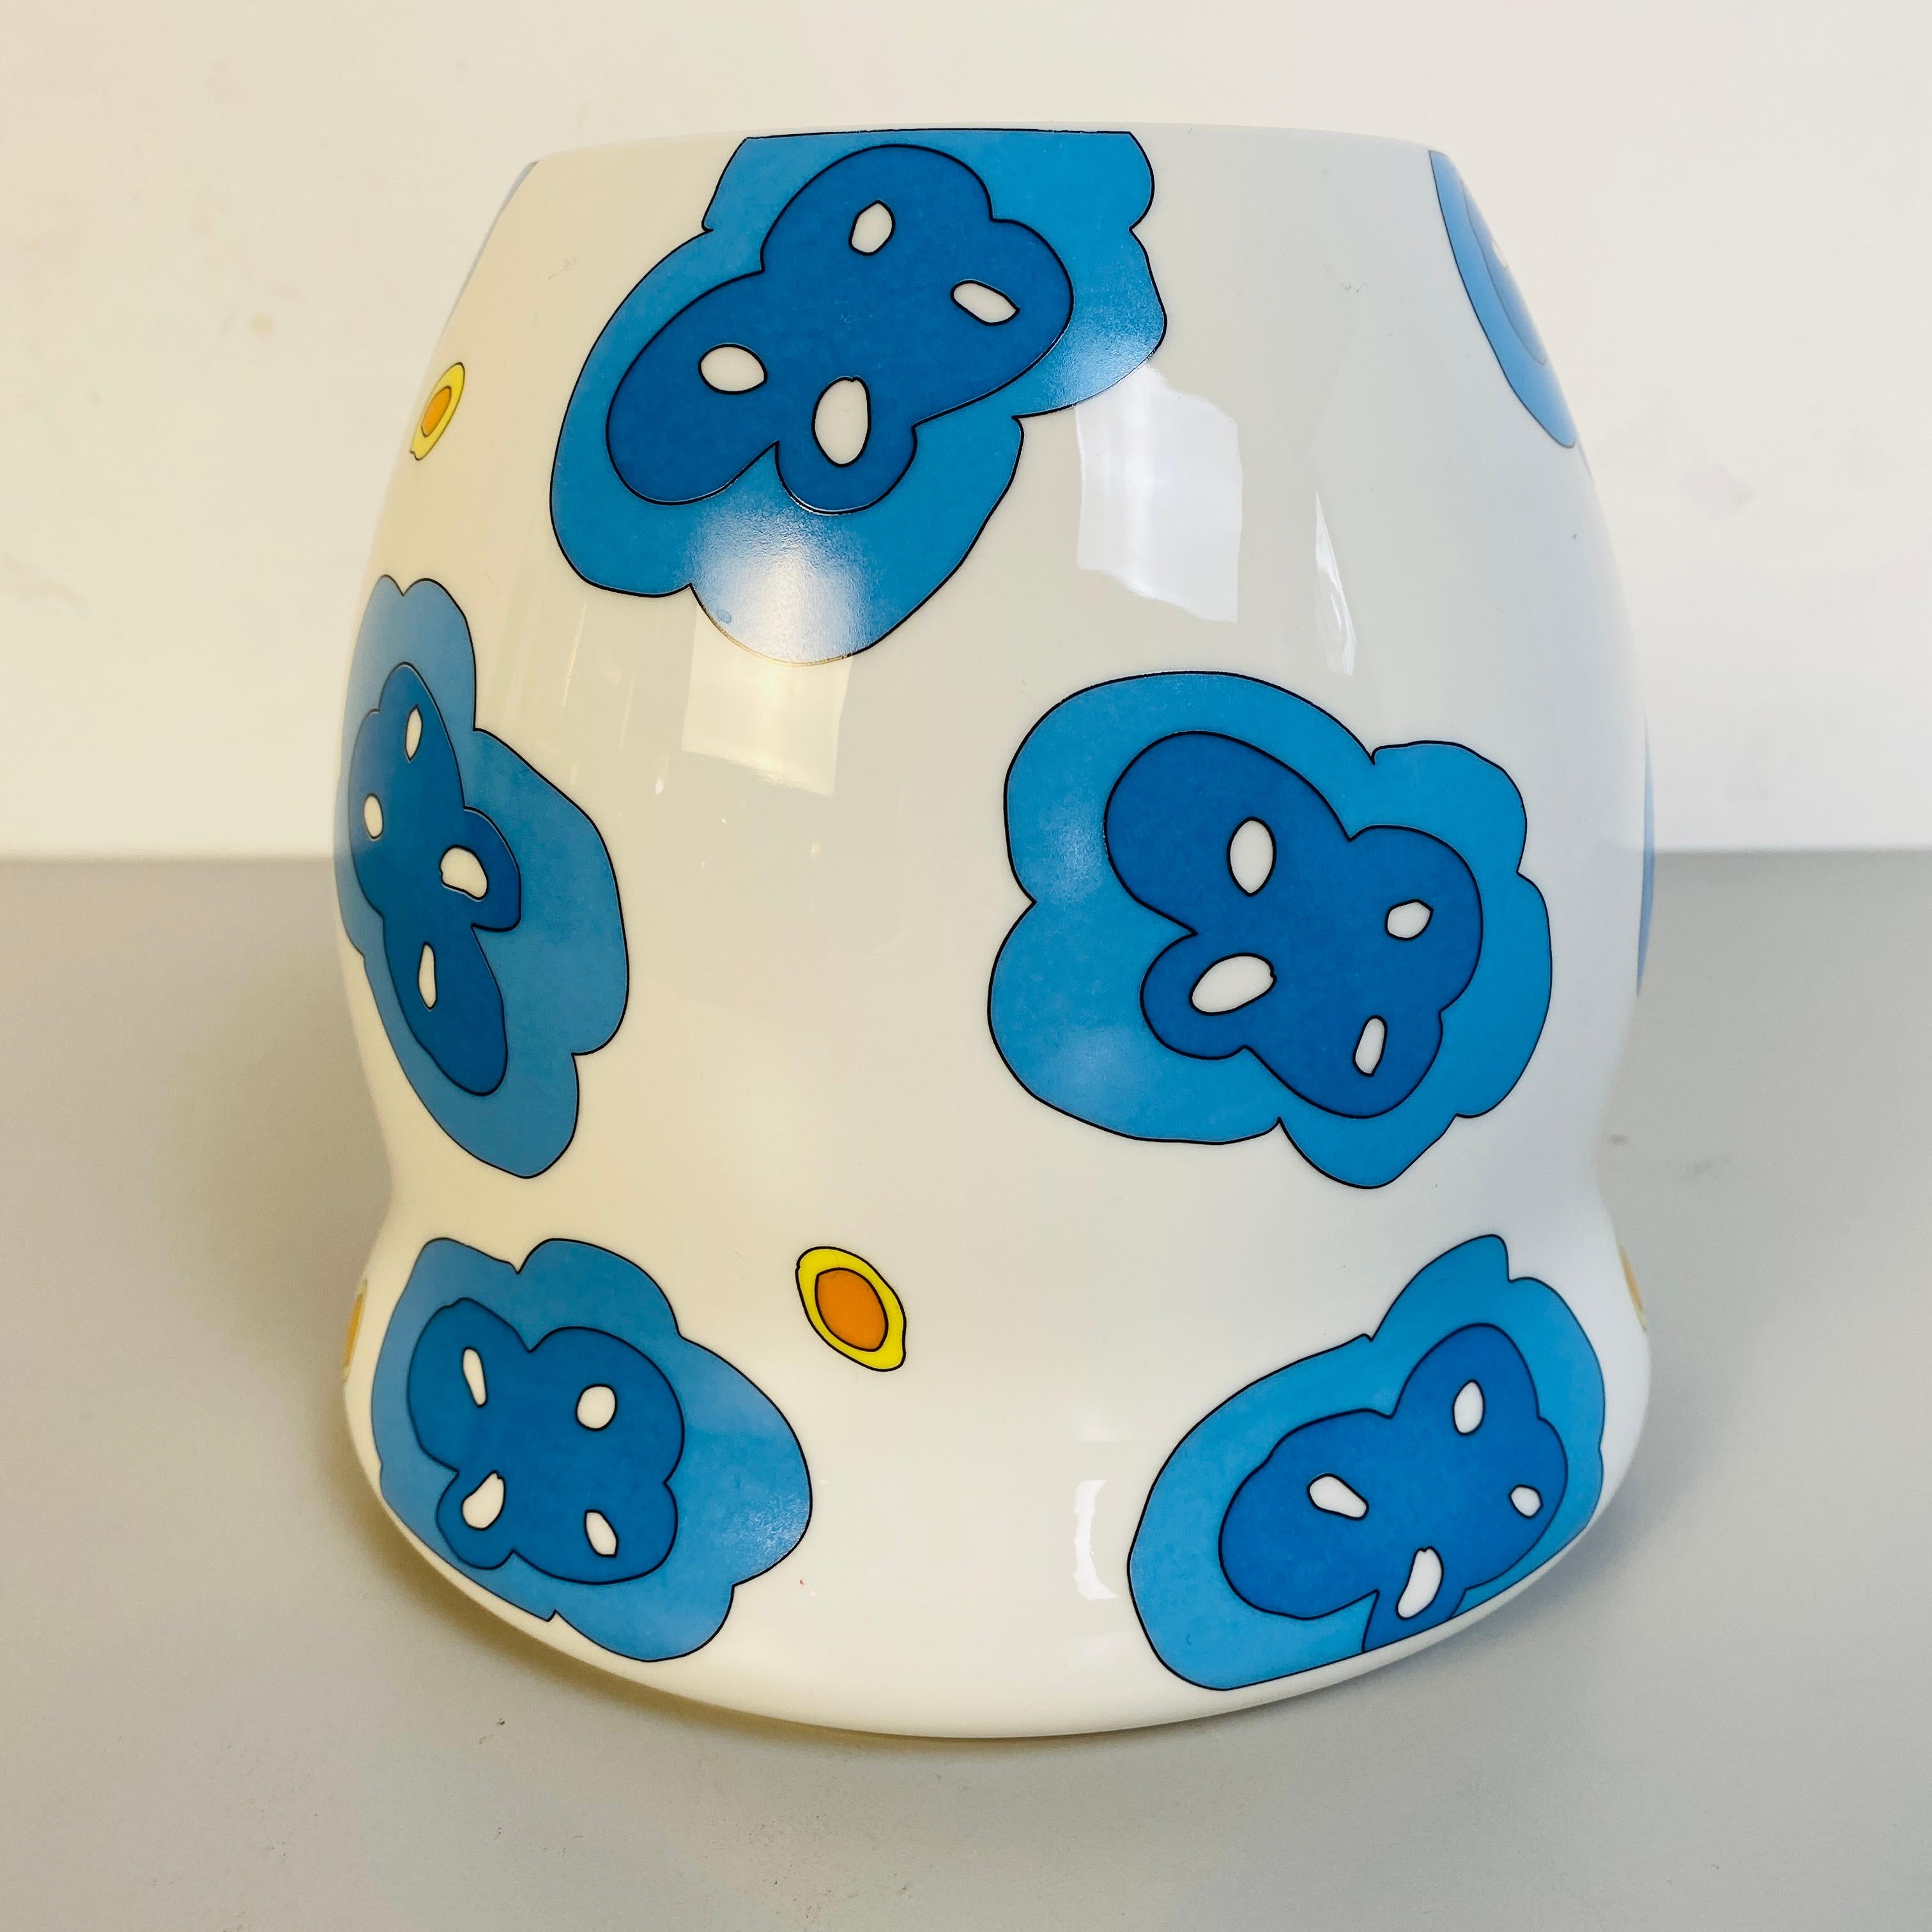 Italian Jaia Biscuit jar by George Sowden and Alice Fiorilli for Alessi, 1997 For Sale 1